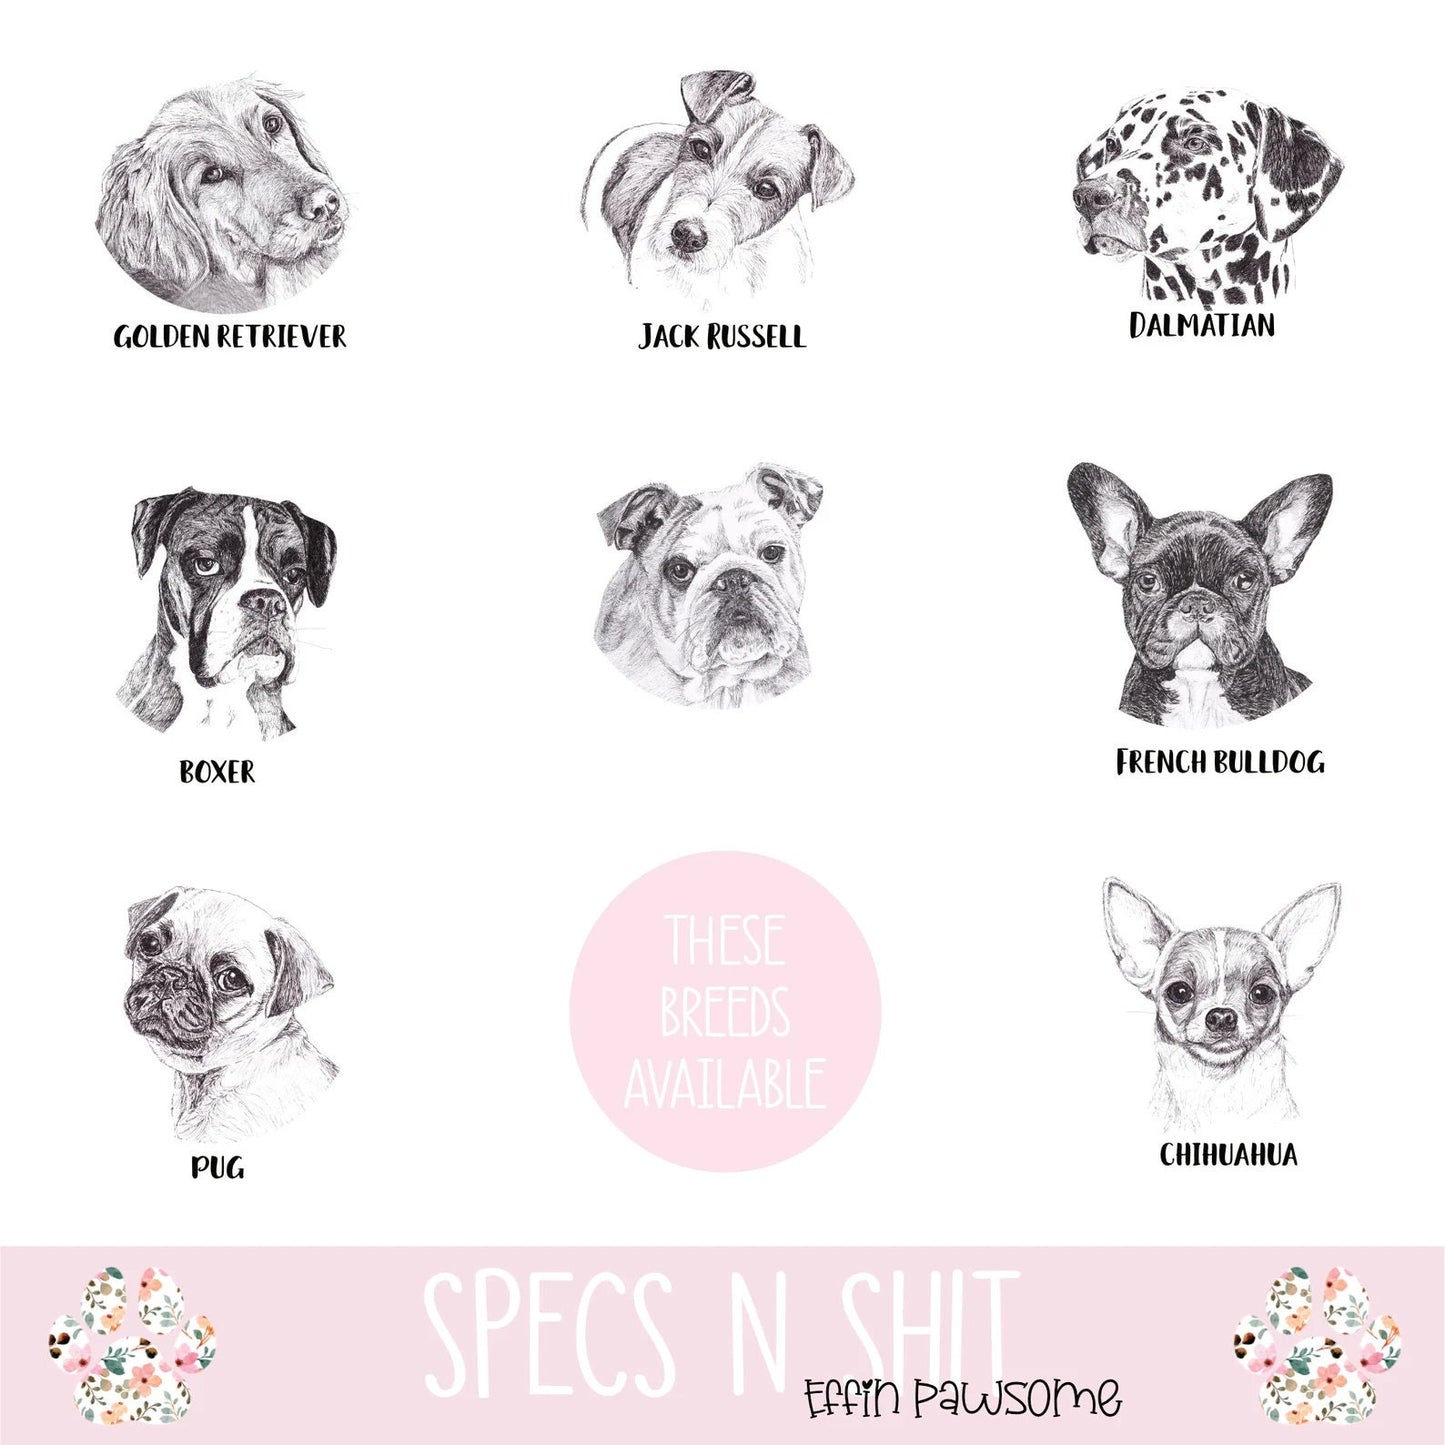 Hate People Dog Pen | Pet & Stationery Lovers | Chihuahua | Pug | French Bulldog | Dalmatian | Boxer | Gift Set | Office Pens | Sarcastic